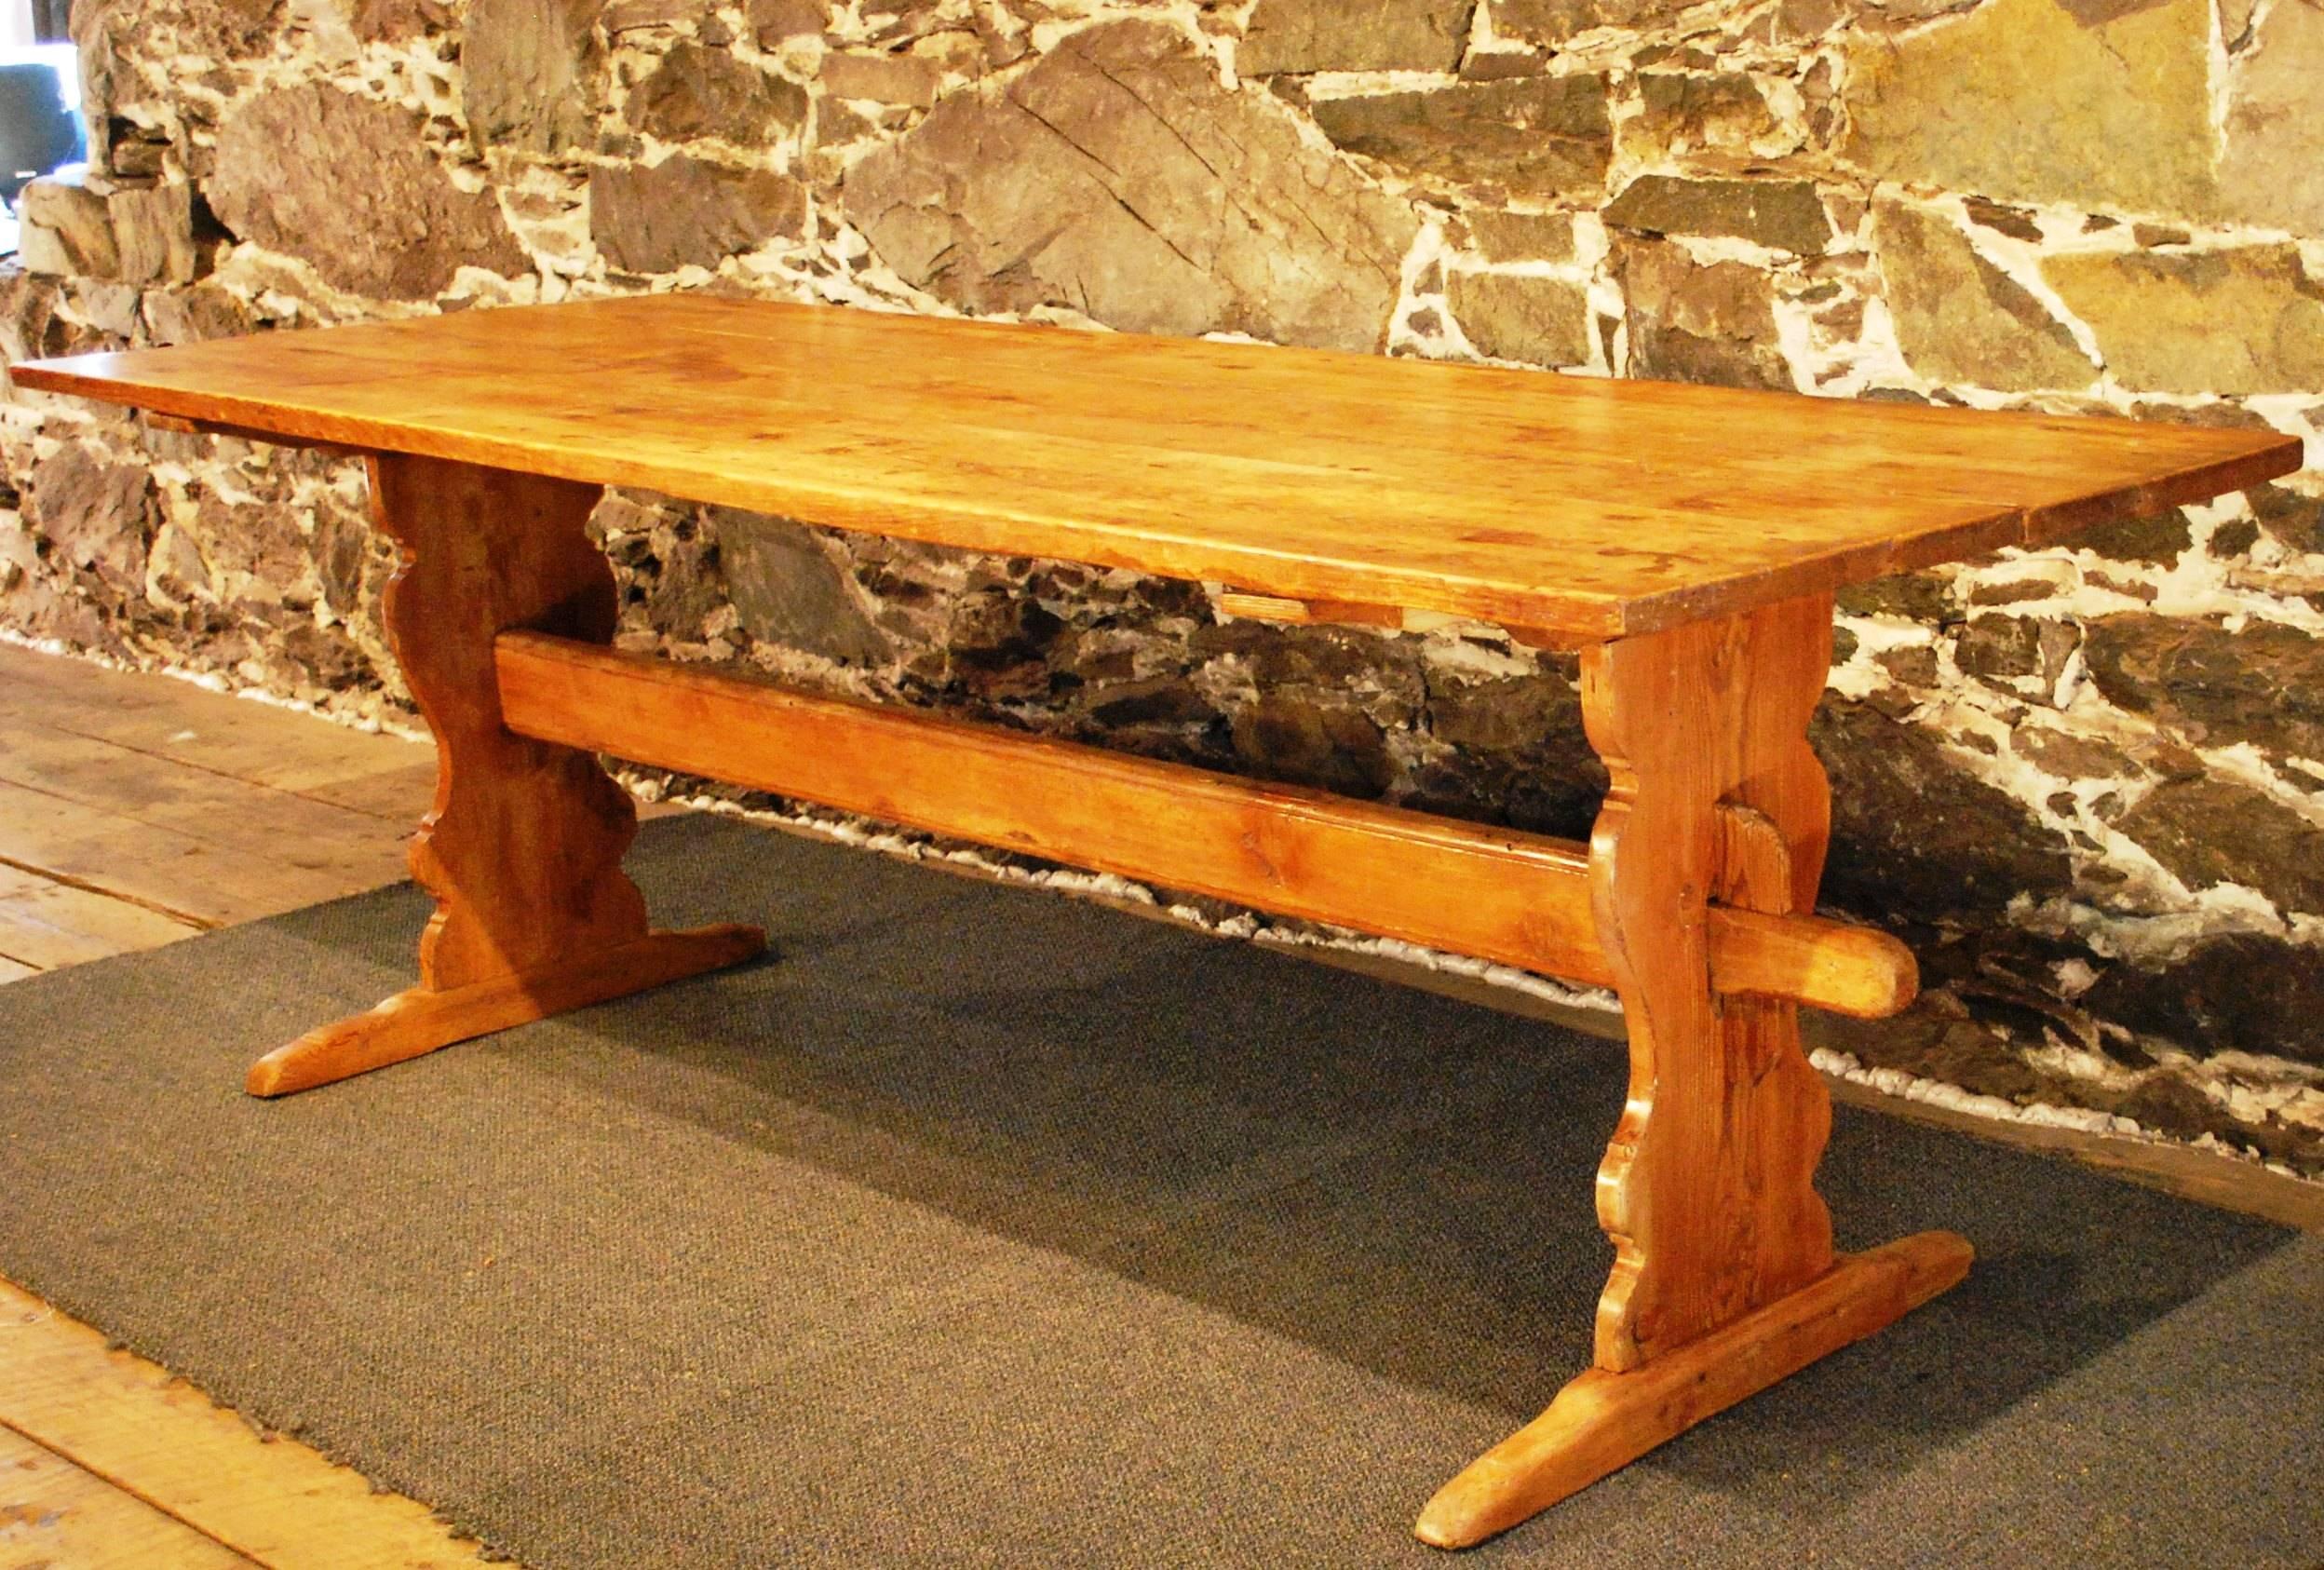 Antique Swedish farm table displaying a wide three board top with a warm aged patina. The strong, finely handcrafted trestle base shows beautifully shaped leg panels and a softly worn rail. This table is very sturdy yet very easy to move.